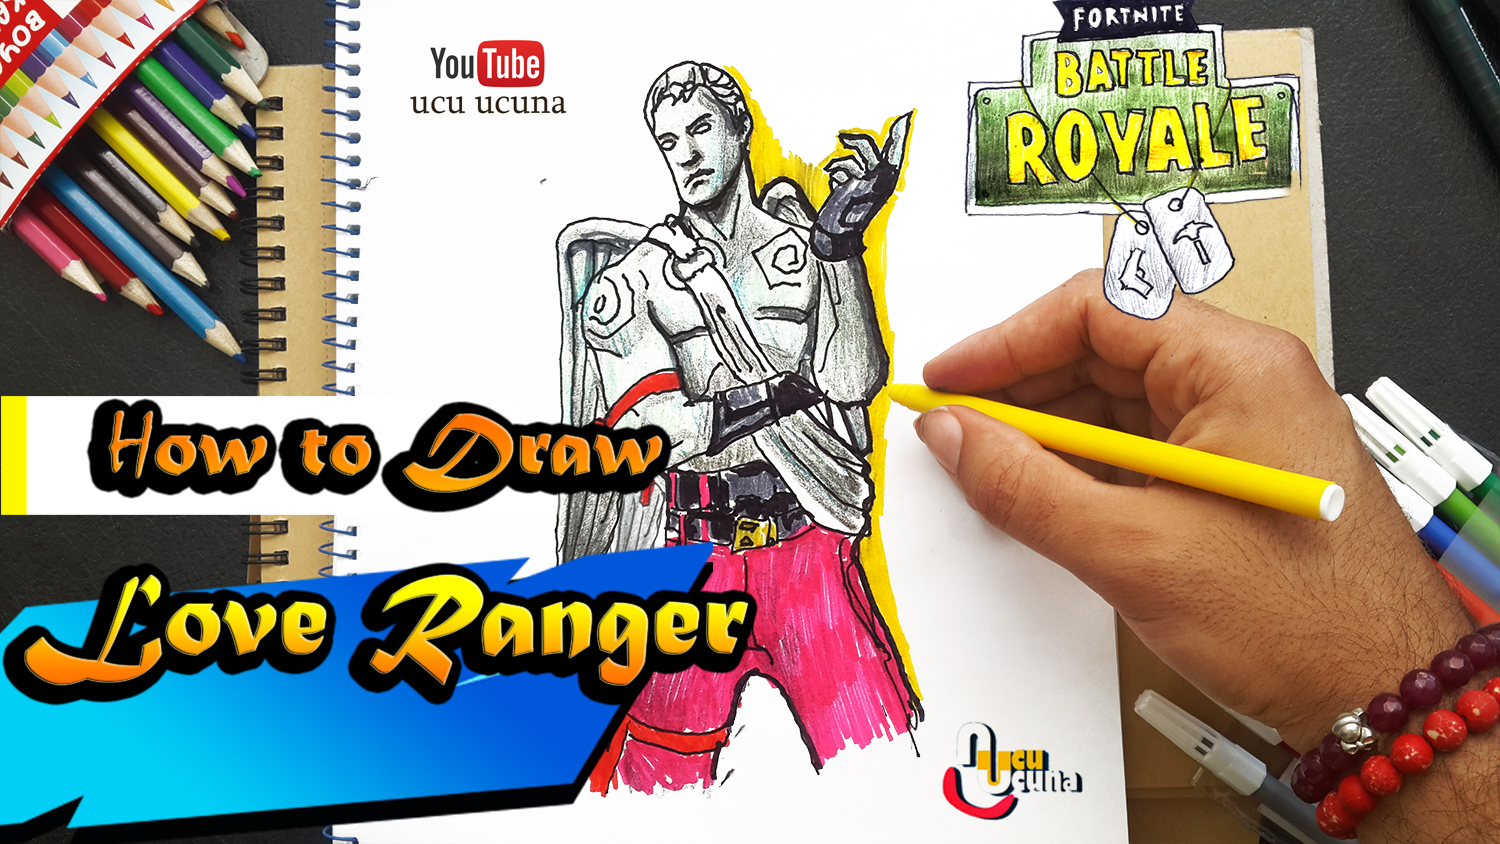 How to draw love ranger tutorial youtube channel name is ucu ucuna Learn how to draw love ranger from Fortnite Step by step beginner drawing tutorial of the love ranger skin in Fortnite.